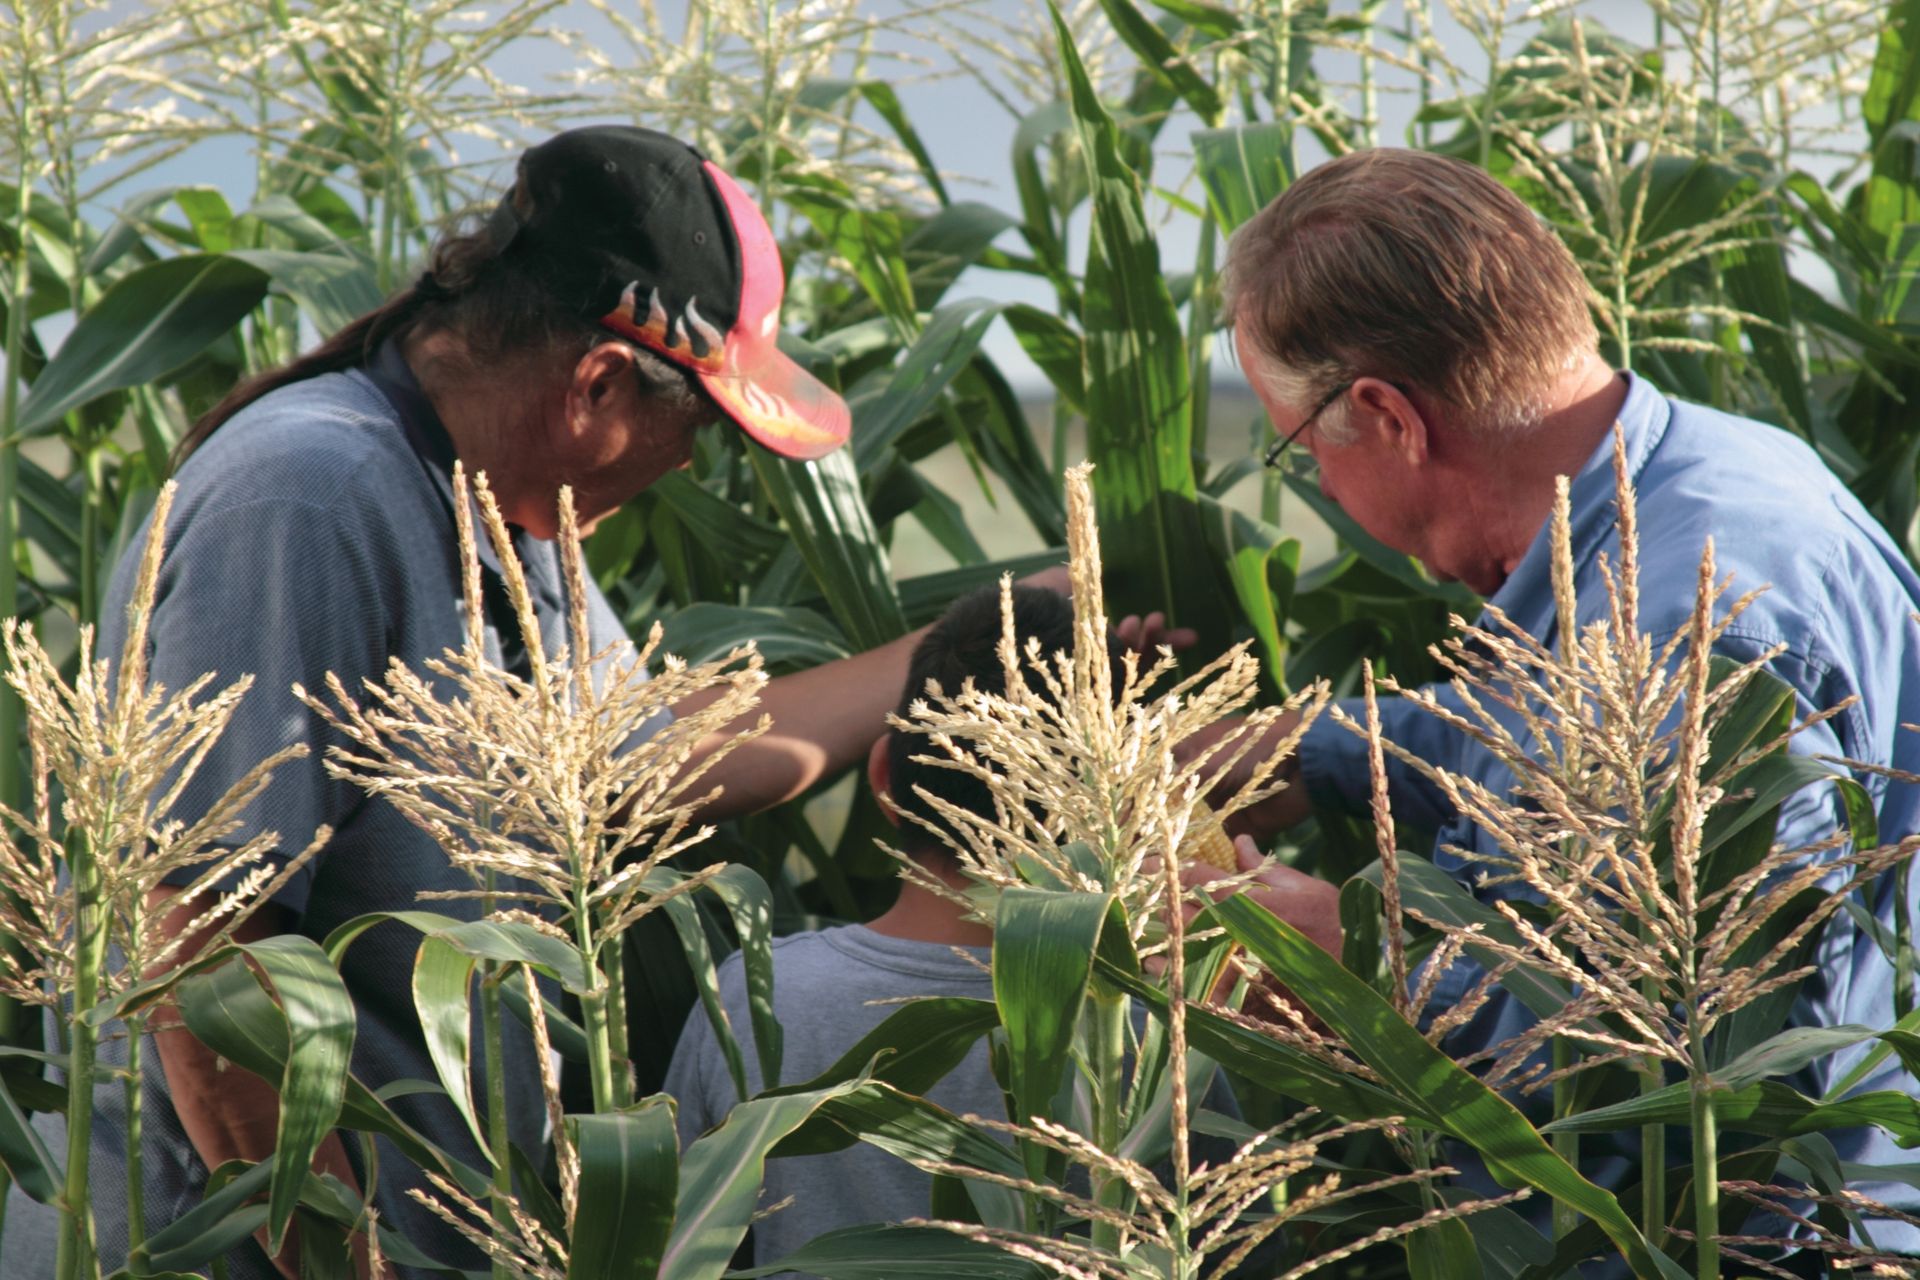 Two men and a young boy standing and looking at cornstalks.